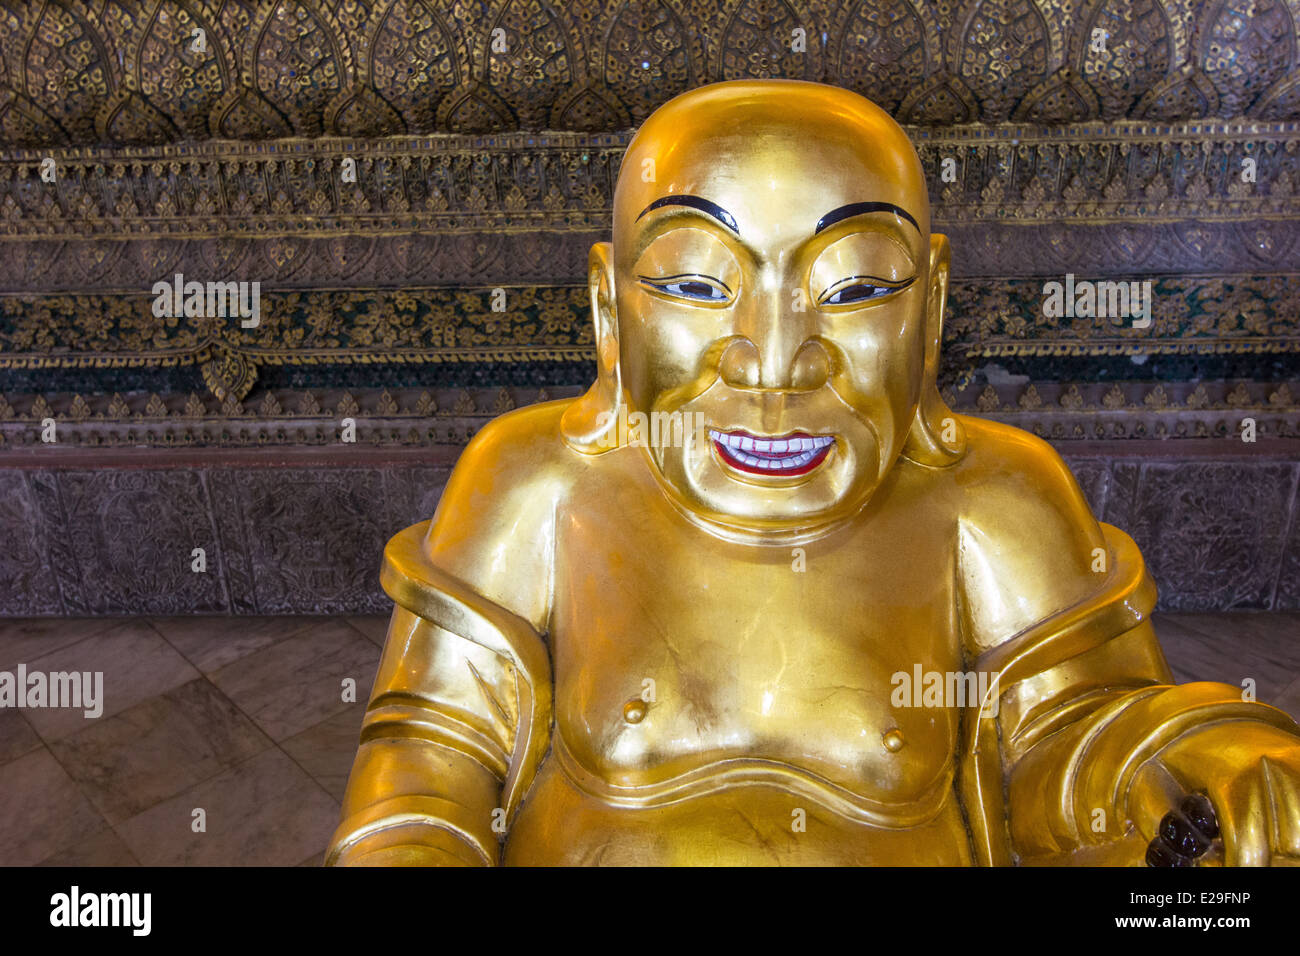 Wat Pho, or the Temple of the Reclining Buddha, is the oldest and largest Buddhist temple in Bangkok. Stock Photo